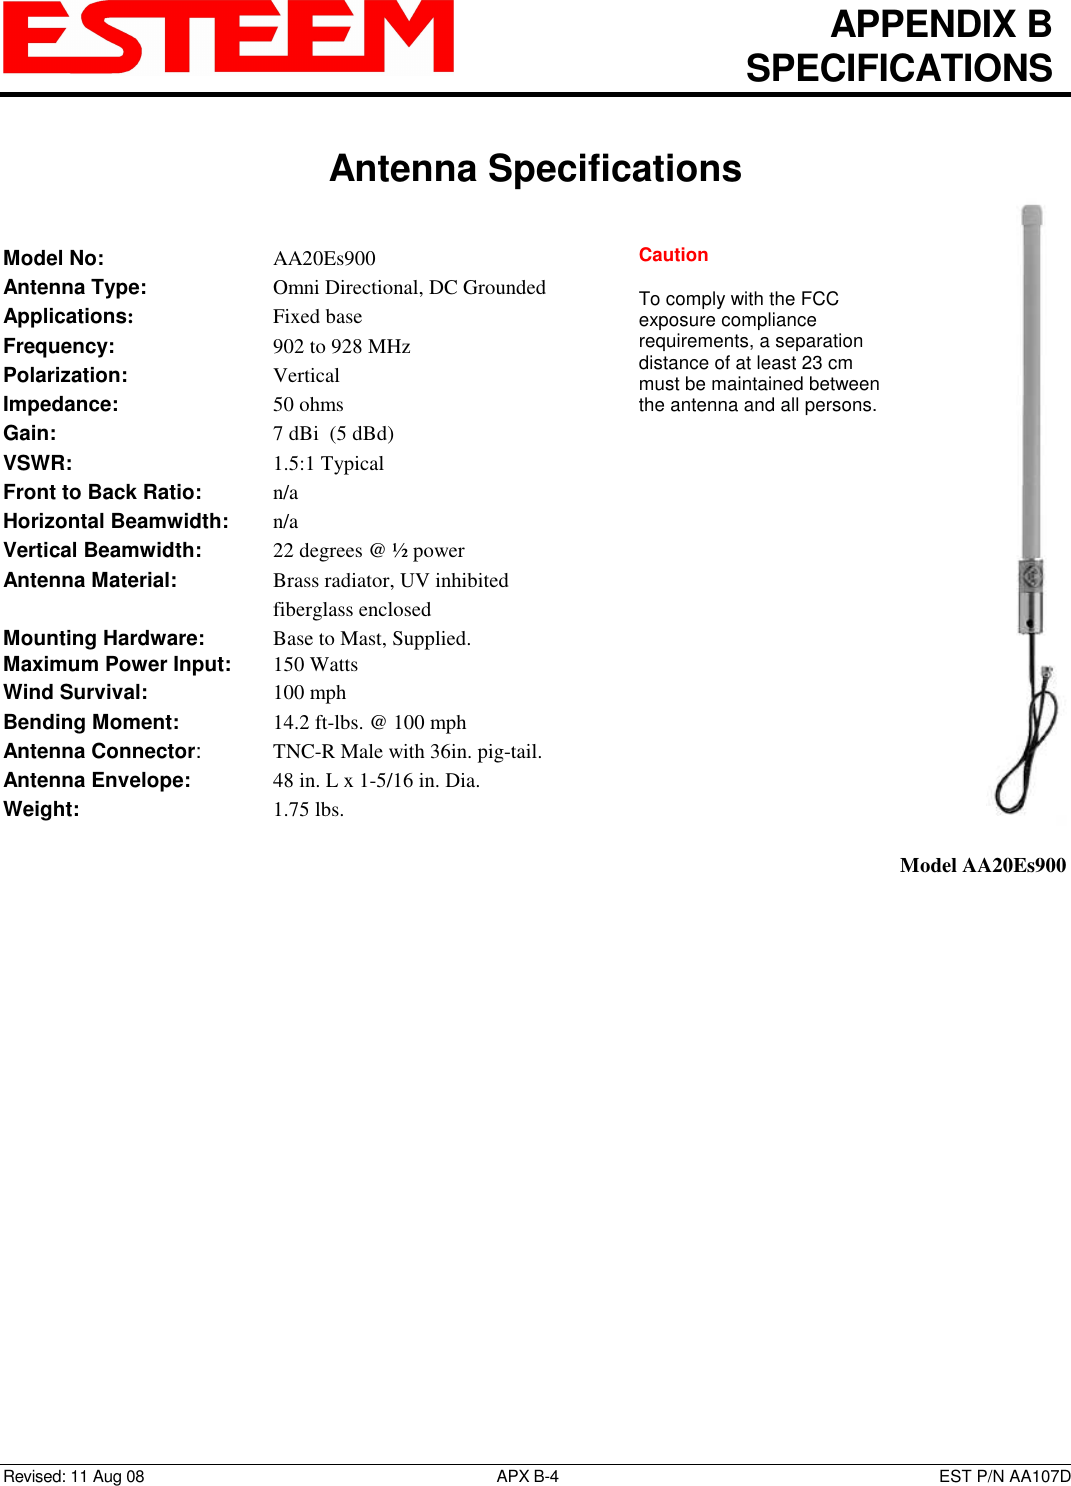   APPENDIX B   SPECIFICATIONS   Antenna Specifications   Revised: 11 Aug 08  APX B-4  EST P/N AA107D Model No:        AA20Es900 Antenna Type:      Omni Directional, DC Grounded Applications:       Fixed base Frequency:        902 to 928 MHz  Polarization:        Vertical Impedance:        50 ohms Gain:          7 dBi  (5 dBd) VSWR:          1.5:1 Typical  Front to Back Ratio:    n/a Horizontal Beamwidth:  n/a Vertical Beamwidth:      22 degrees @ ½ power Antenna Material:     Brass radiator, UV inhibited fiberglass enclosed  Mounting Hardware:      Base to Mast, Supplied.  Maximum Power Input: 150 Watts Wind Survival:      100 mph Bending Moment:     14.2 ft-lbs. @ 100 mph Antenna Connector:    TNC-R Male with 36in. pig-tail. Antenna Envelope:    48 in. L x 1-5/16 in. Dia. Weight:           1.75 lbs.     Model AA20Es900 Caution  To comply with the FCC exposure compliance requirements, a separation distance of at least 23 cm must be maintained between the antenna and all persons.  